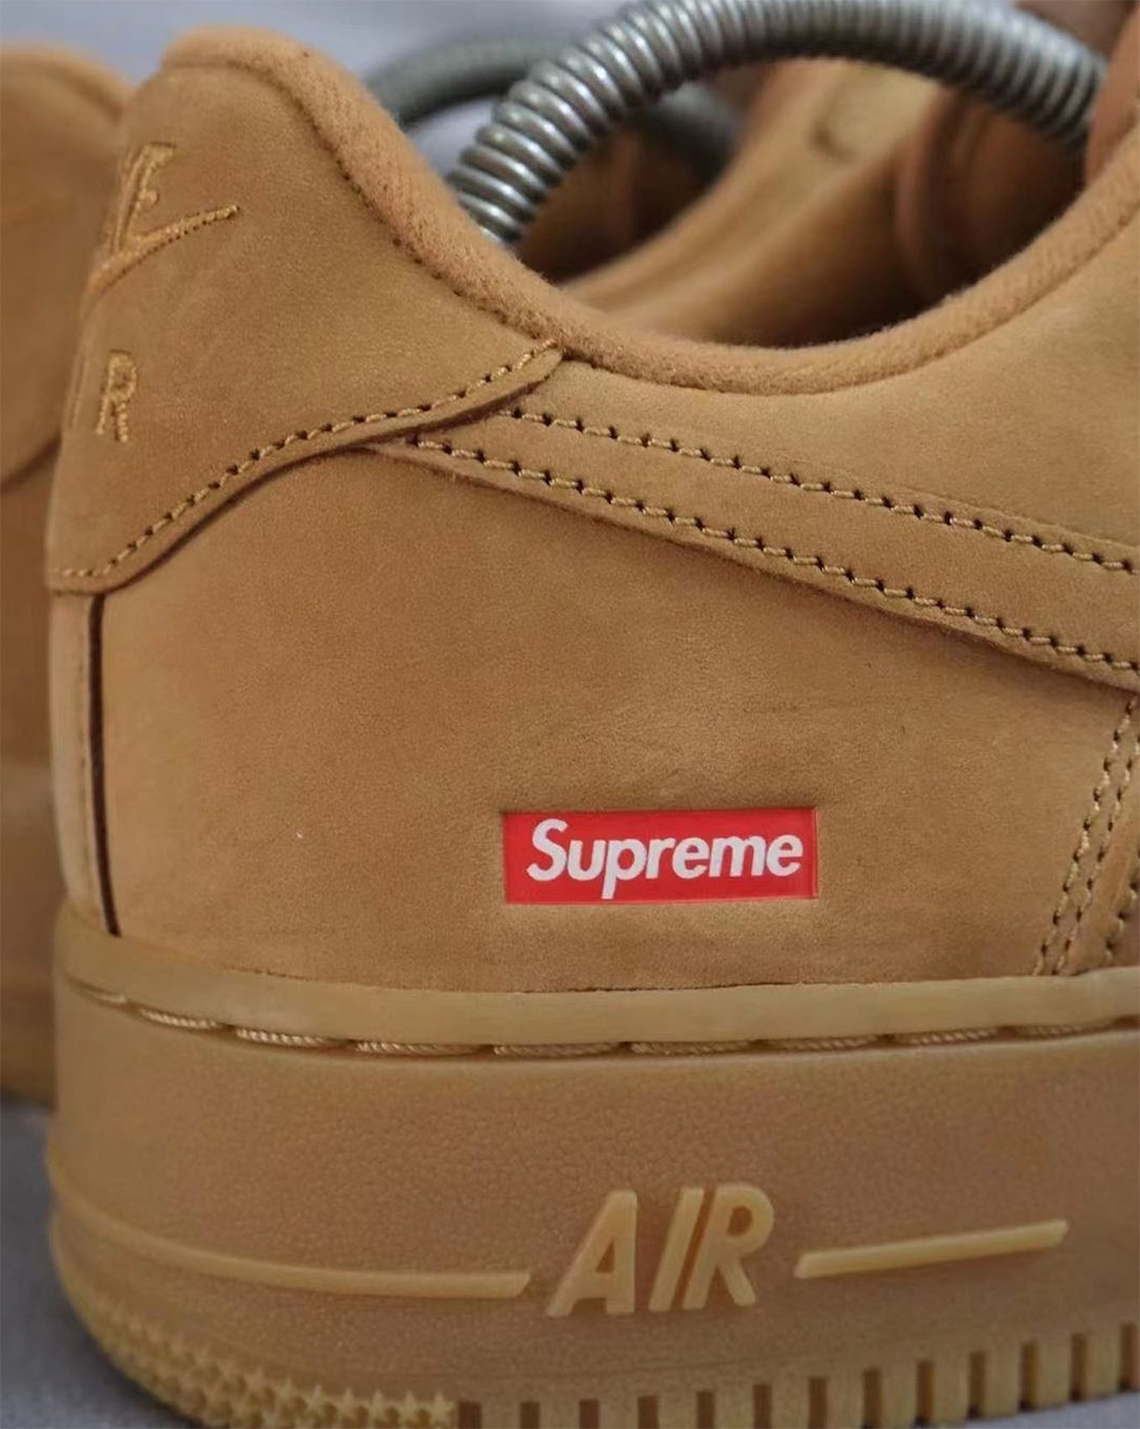 air force one wheat low